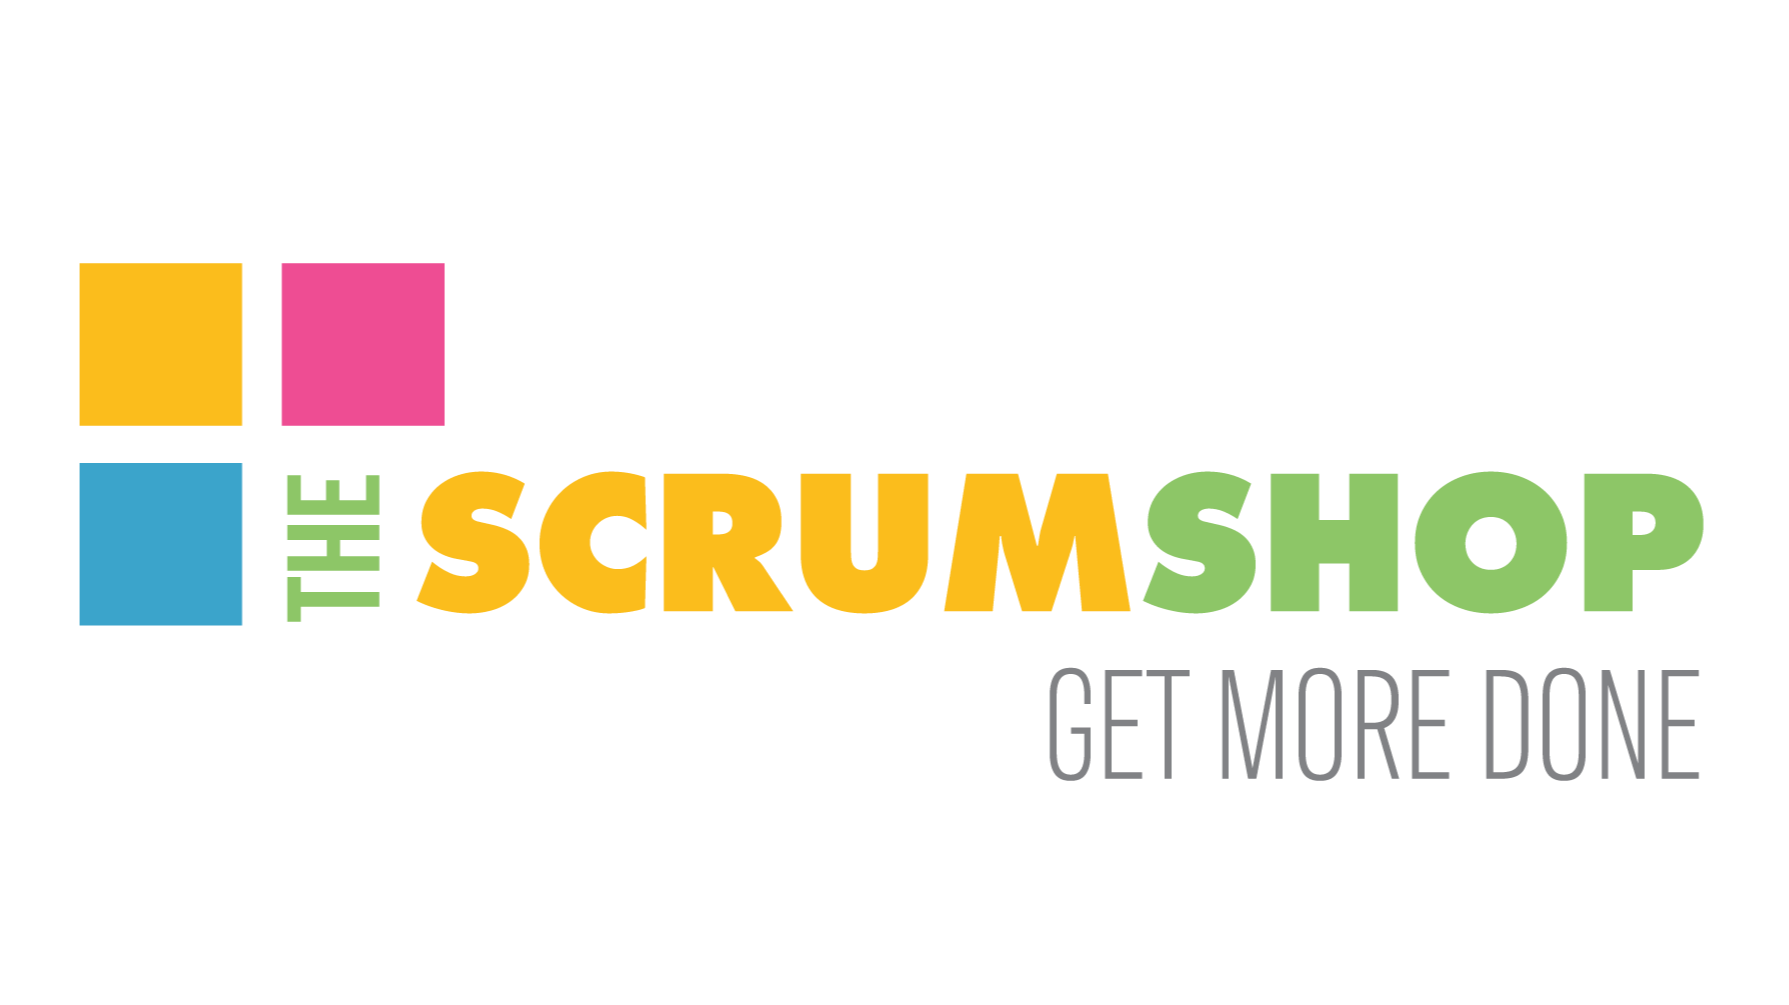 THE SCRUM SHOP© Get More Done